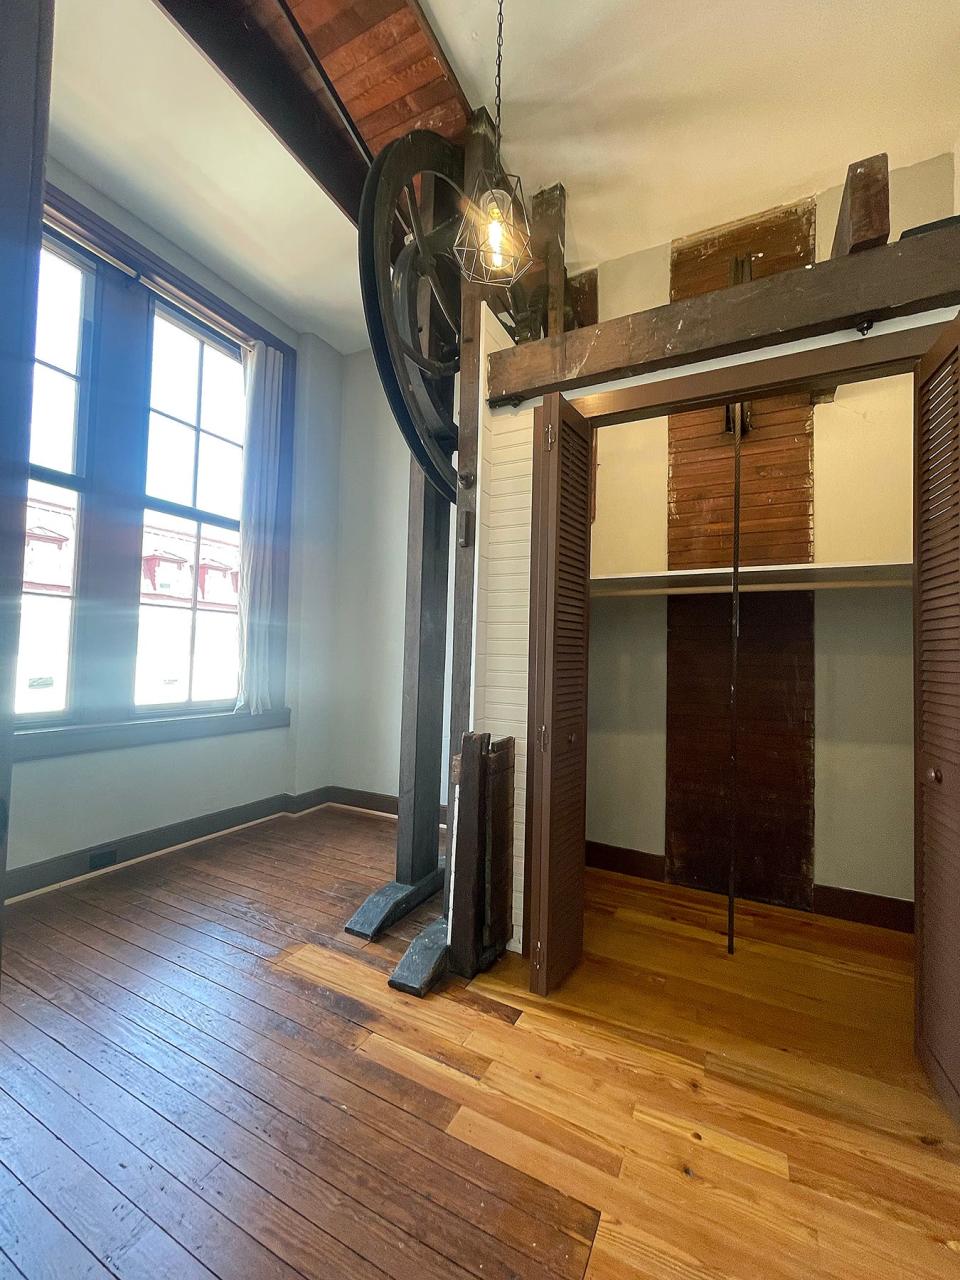 This Updegraff apartment features a small den or bedroom with a unique detail: the gear mechanism from the factory building's original elevator